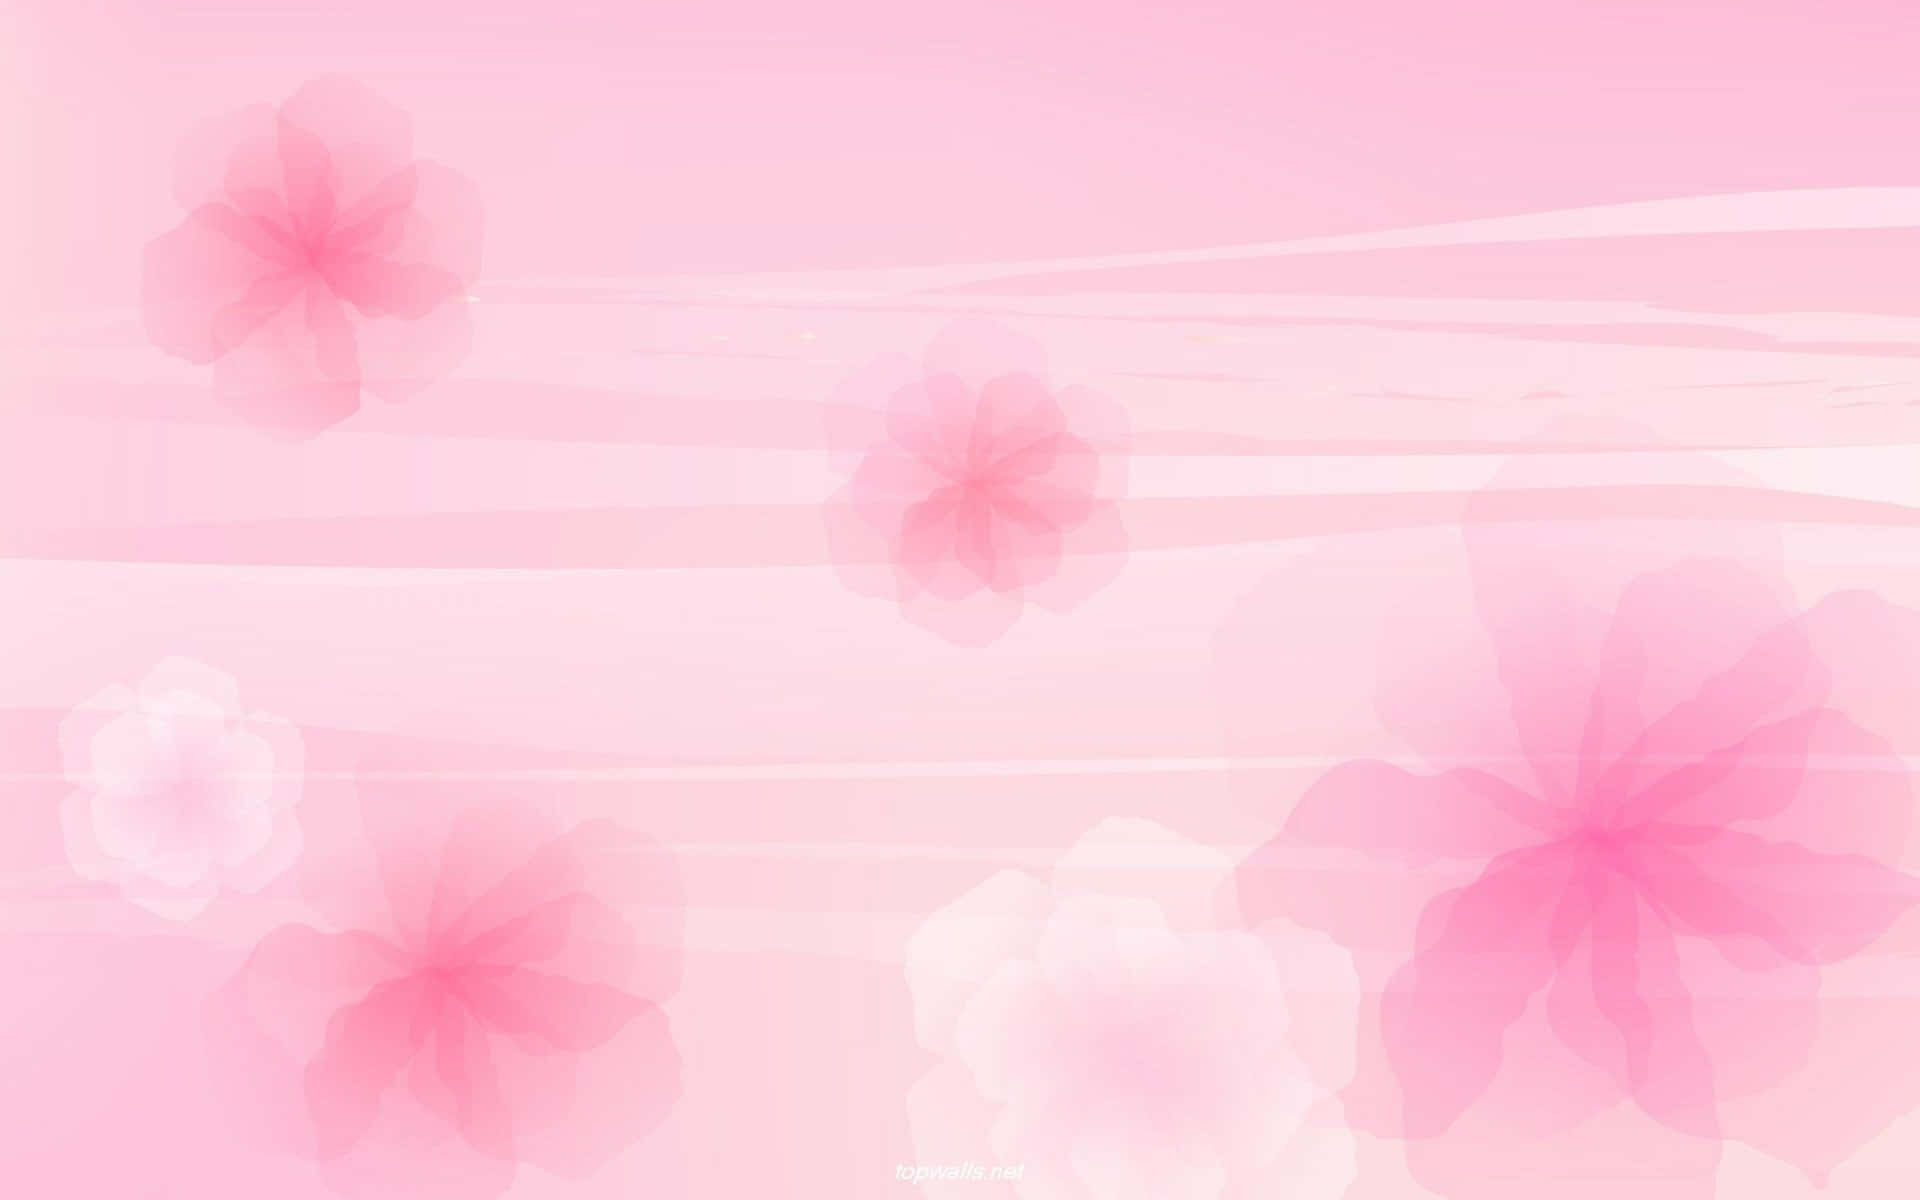 Colorful Background of Shades of Pink